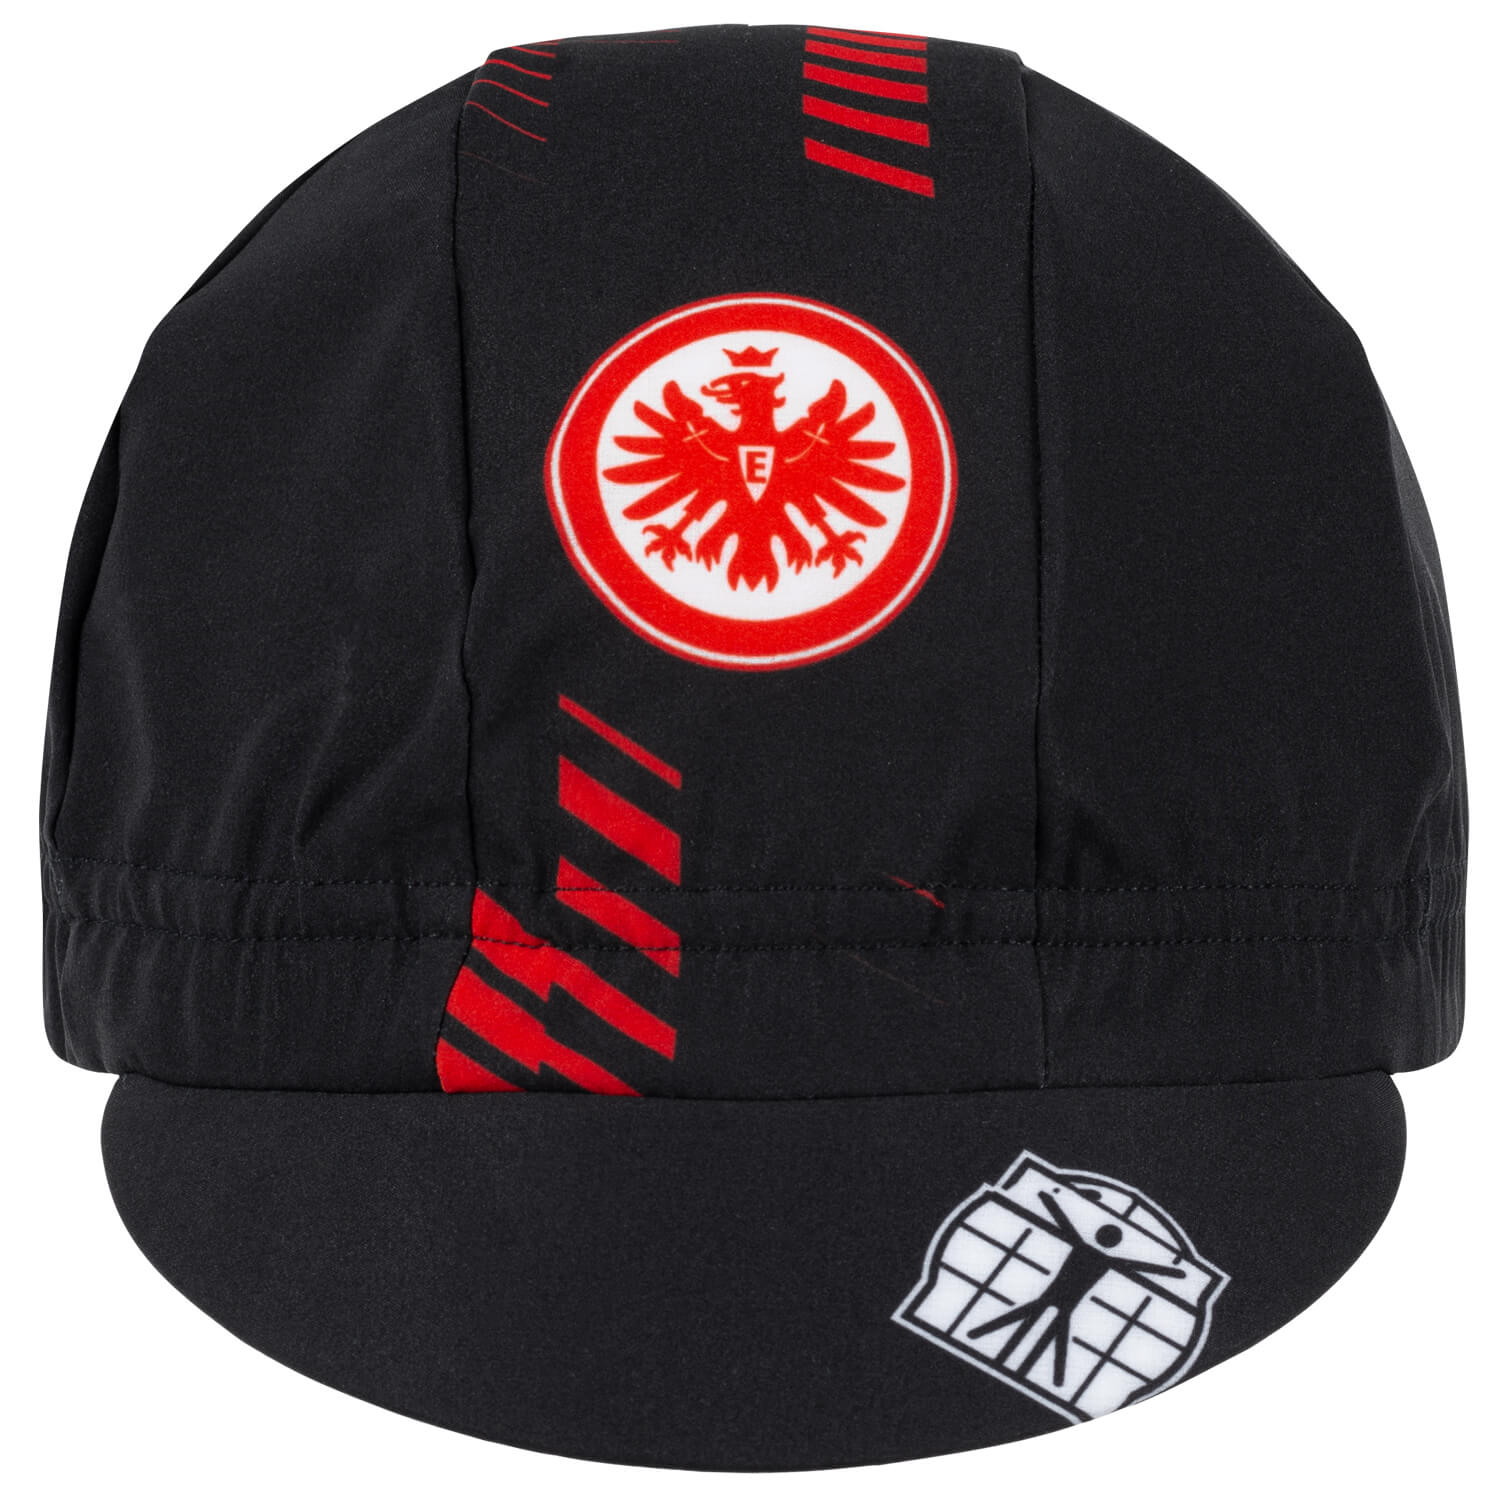 Bild 2: Cycling Cap Red Style 